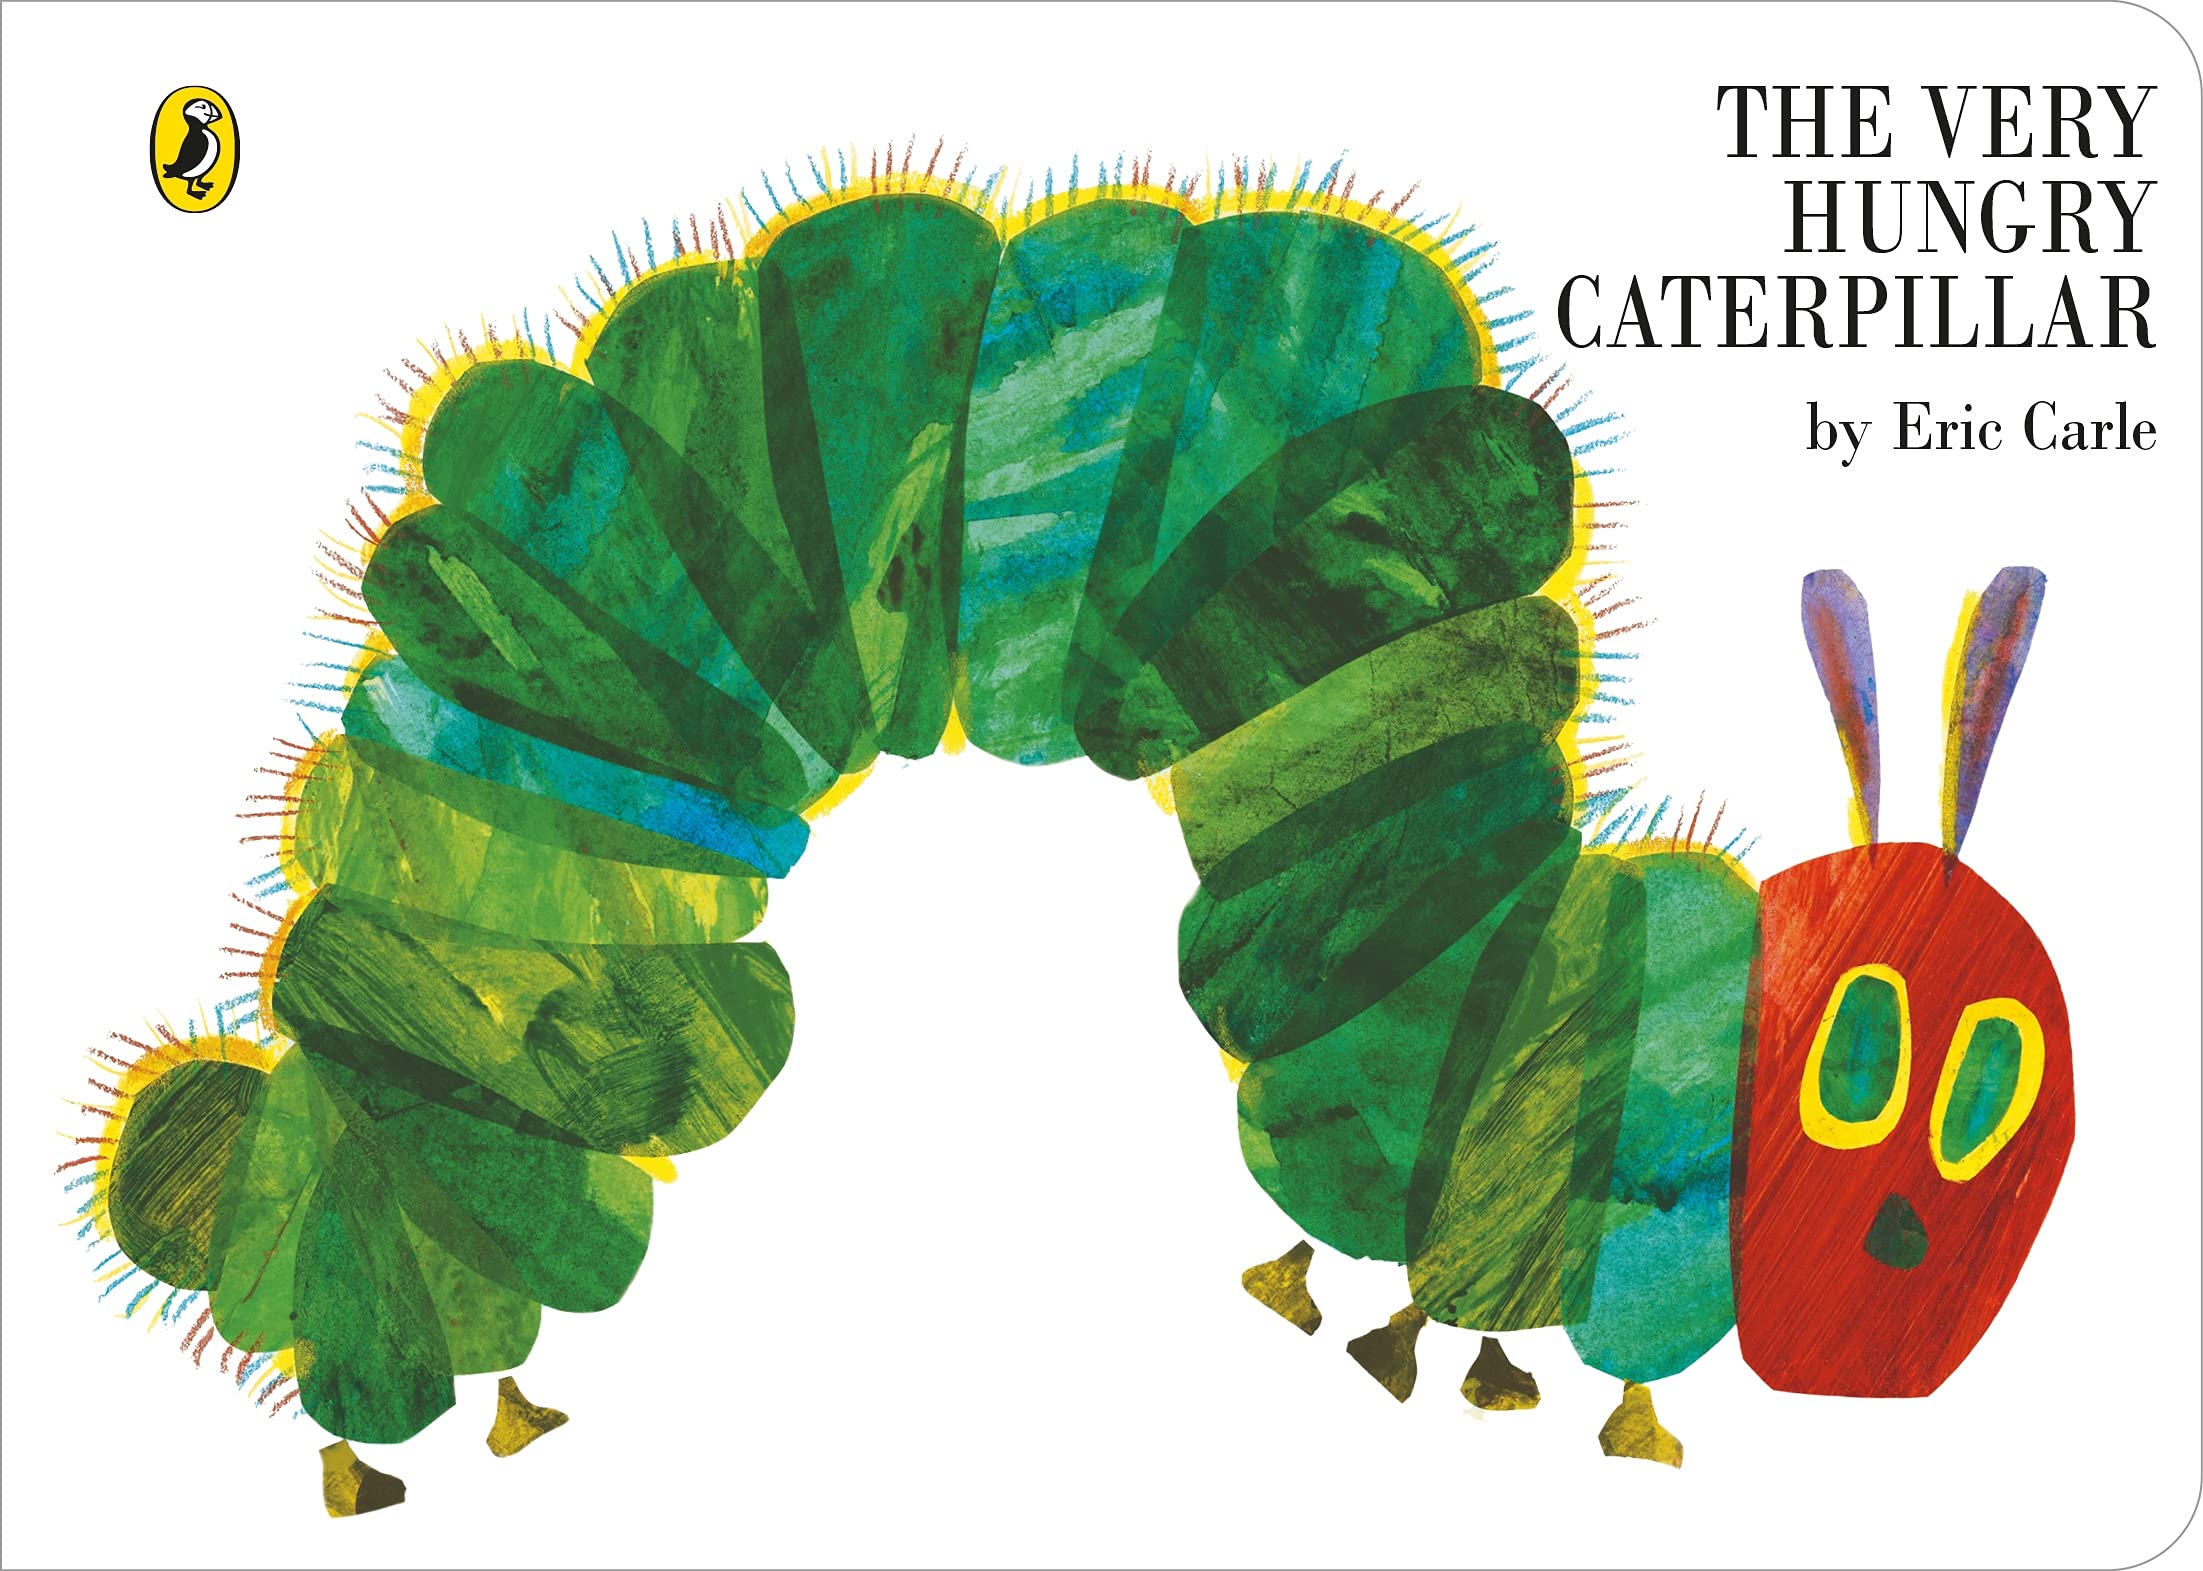 critical thinking questions for the very hungry caterpillar